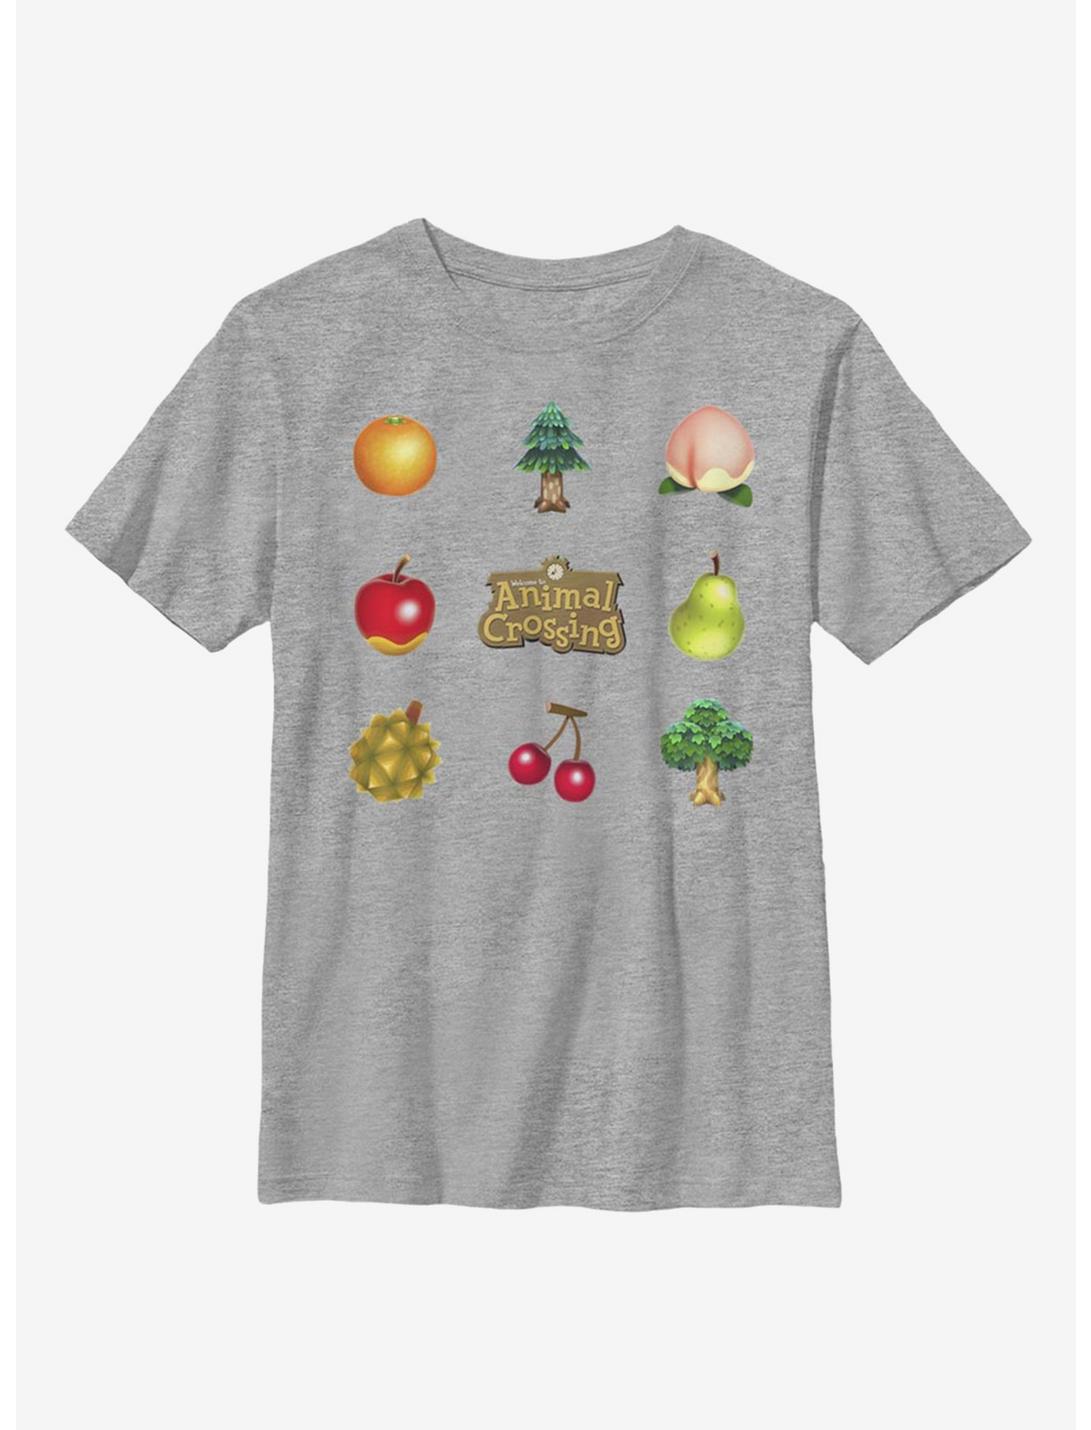 Animal Crossing Items Youth T-Shirt, ATH HTR, hi-res